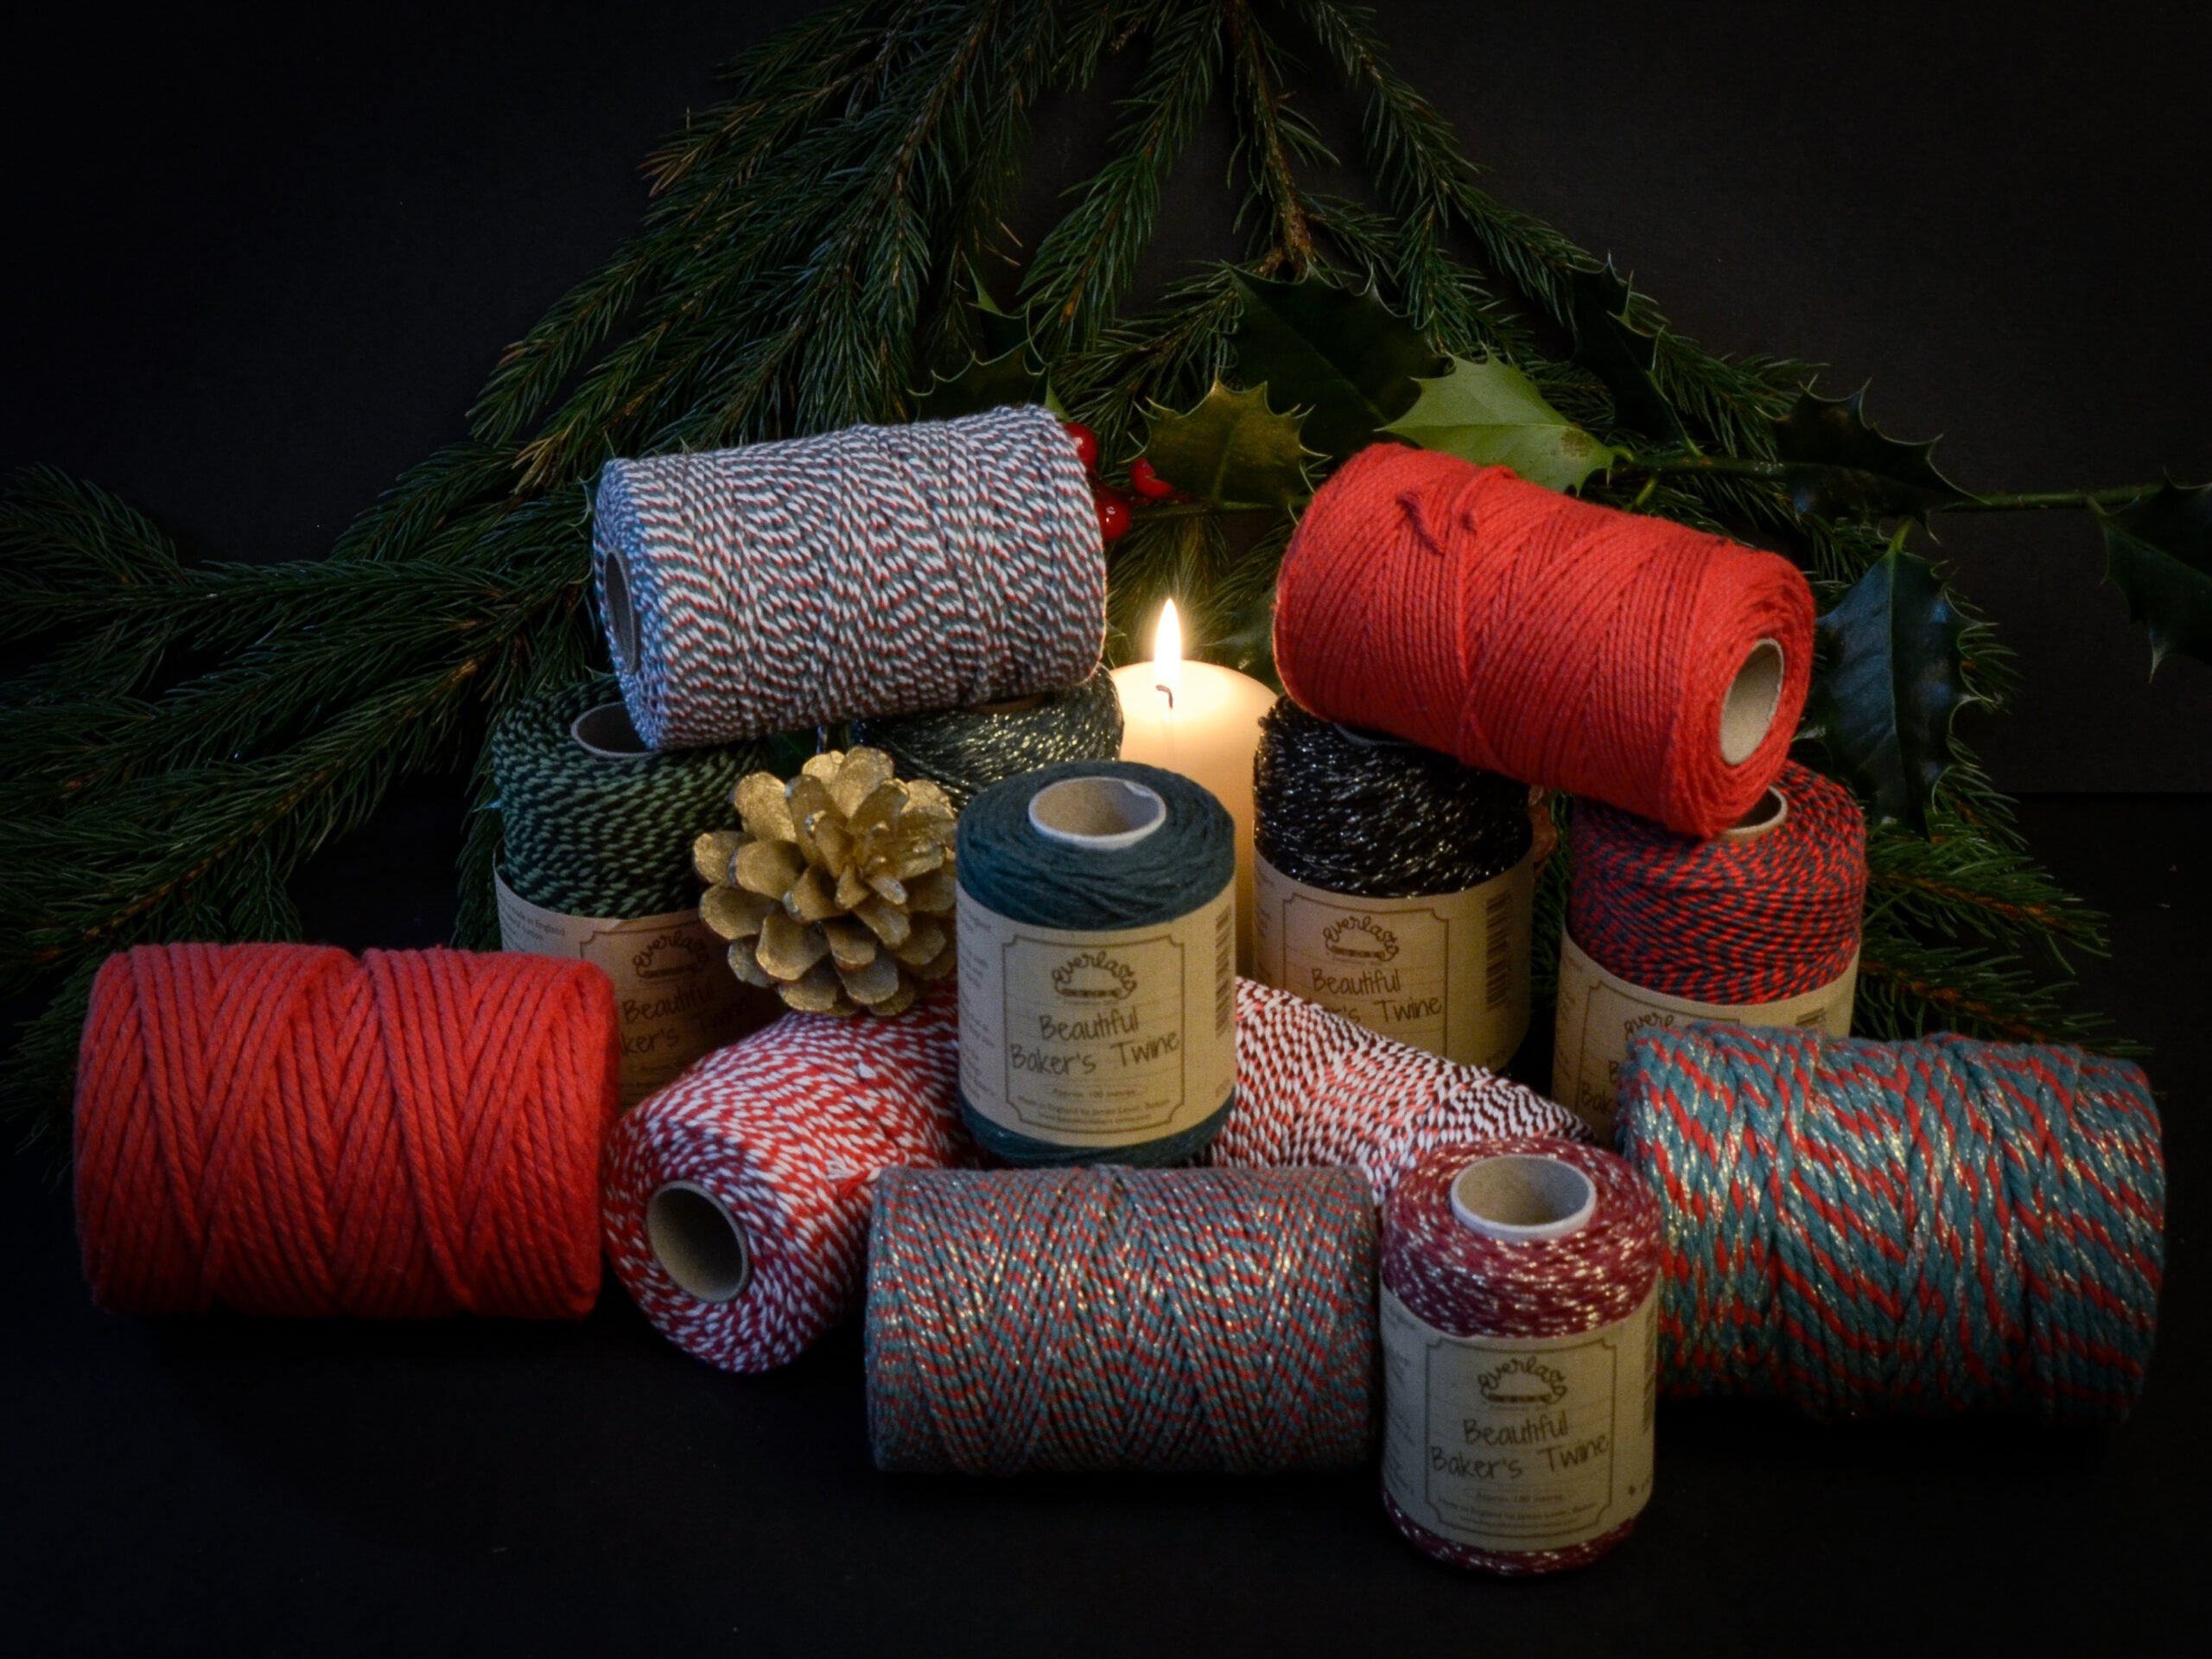 4 Rolls Christmas Twine String For Crafts Cotton String, Natural Jute Twine  String Jute Rope, Green Red And White Twine Craft Twine Rope Wrapping, Gar